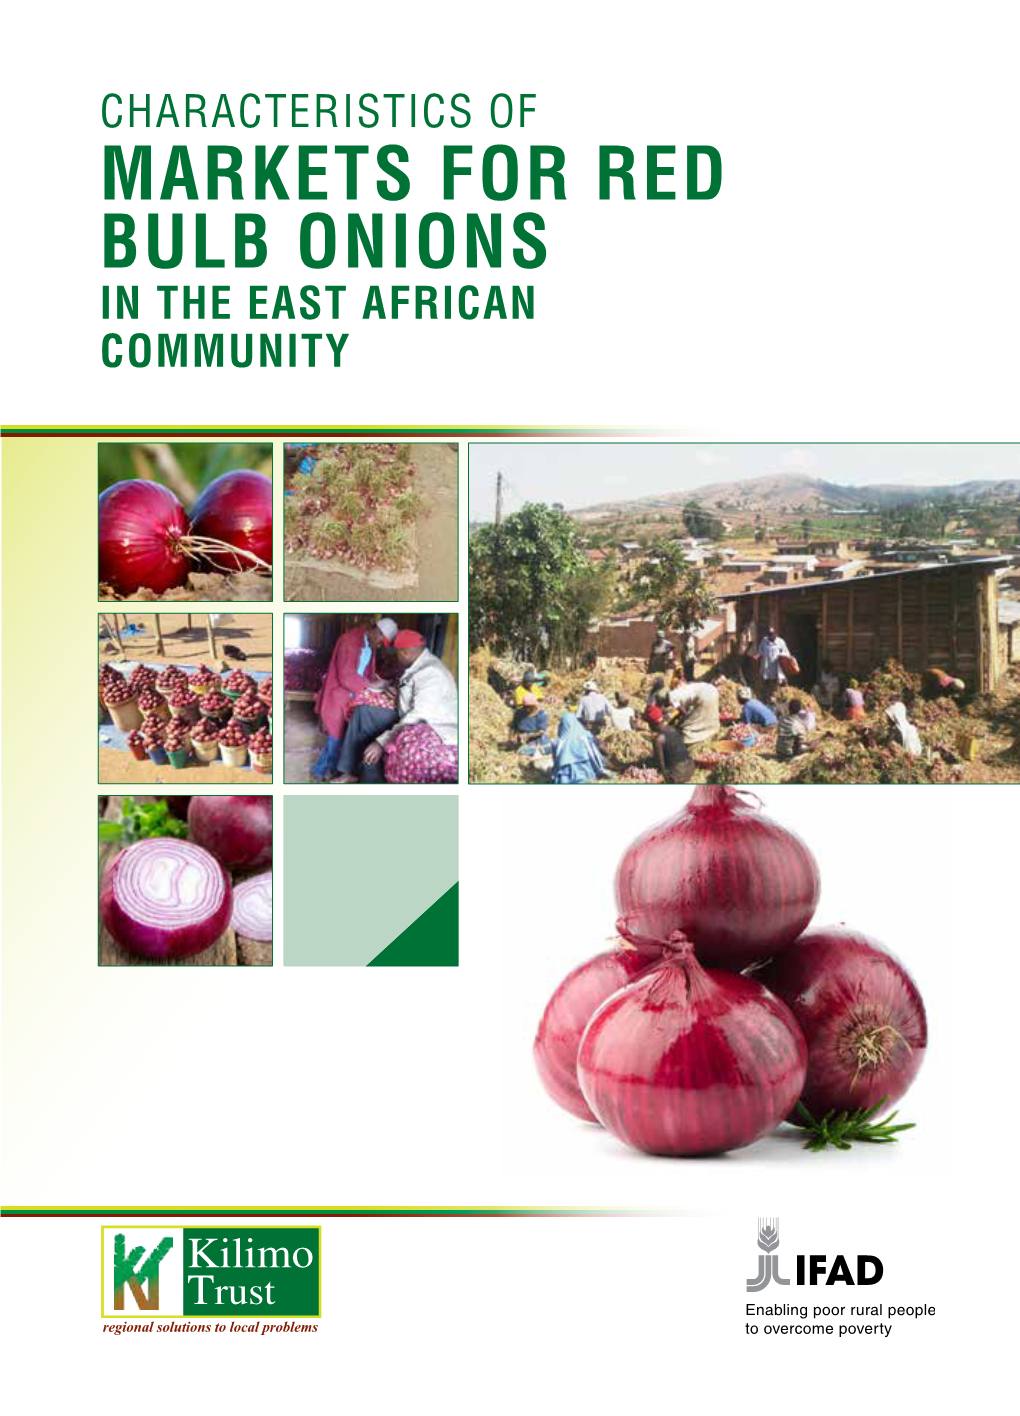 Markets for Red Bulb Onions in the East African Community